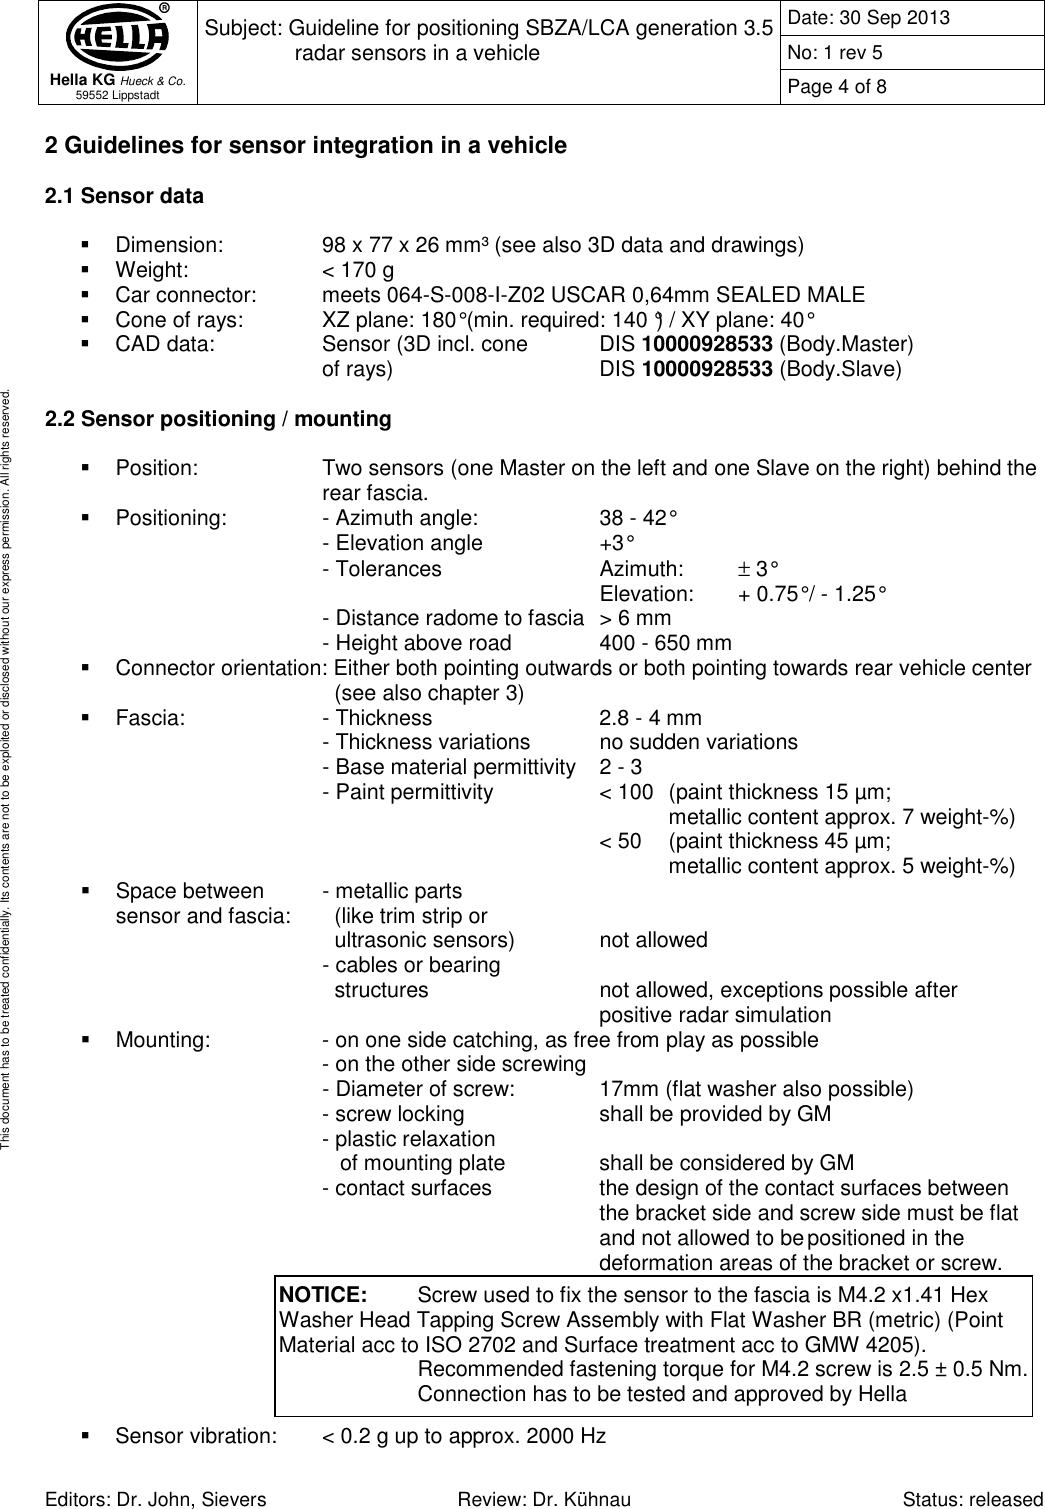  Hella KG Hueck &amp; Co. 59552 Lippstadt Subject: Guideline for positioning SBZA/LCA generation 3.5 radar sensors in a vehicle  Date: 30 Sep 2013 No: 1 rev 5 Page 4 of 8   Editors: Dr. John, Sievers  Review: Dr. Kühnau  Status: released This document has to be treated confidentially. Its contents are not to be exploited or disclosed without our express permission. All rights reserved. 2 Guidelines for sensor integration in a vehicle  2.1 Sensor data    Dimension:    98 x 77 x 26 mm³ (see also 3D data and drawings)   Weight:     &lt; 170 g   Car connector:   meets 064-S-008-I-Z02 USCAR 0,64mm SEALED MALE   Cone of rays:    XZ plane: 180° (min. required: 140 °) / XY plane: 40°    CAD data:    Sensor (3D incl. cone   DIS 10000928533 (Body.Master)       of rays)       DIS 10000928533 (Body.Slave)  2.2 Sensor positioning / mounting    Position:    Two sensors (one Master on the left and one Slave on the right) behind the       rear fascia.   Positioning:    - Azimuth angle:    38 - 42°            - Elevation angle     +3°        - Tolerances      Azimuth:   ± 3°                Elevation:   + 0.75° / - 1.25°         - Distance radome to fascia  &gt; 6 mm        - Height above road    400 - 650 mm   Connector orientation: Either both pointing outwards or both pointing towards rear vehicle center          (see also chapter 3)   Fascia:    - Thickness      2.8 - 4 mm        - Thickness variations   no sudden variations         - Base material permittivity  2 - 3       - Paint permittivity    &lt; 100  (paint thickness 15 µm;                   metallic content approx. 7 weight-%)                &lt; 50   (paint thickness 45 µm;                   metallic content approx. 5 weight-%)   Space between  - metallic parts sensor and fascia:    (like trim strip or           ultrasonic sensors)    not allowed        - cables or bearing          structures       not allowed, exceptions possible after                 positive radar simulation    Mounting:    - on one side catching, as free from play as possible          - on the other side screwing - Diameter of screw:    17mm (flat washer also possible)      - screw locking    shall be provided by GM       - plastic relaxation         of mounting plate     shall be considered by GM      - contact surfaces    the design of the contact surfaces between              the bracket side and screw side must be flat             and not allowed to be positioned in the              deformation areas of the bracket or screw.          Sensor vibration:  &lt; 0.2 g up to approx. 2000 Hz  NOTICE:   Screw used to fix the sensor to the fascia is M4.2 x1.41 Hex Washer Head Tapping Screw Assembly with Flat Washer BR (metric) (Point Material acc to ISO 2702 and Surface treatment acc to GMW 4205).     Recommended fastening torque for M4.2 screw is 2.5 ± 0.5 Nm.     Connection has to be tested and approved by Hella 